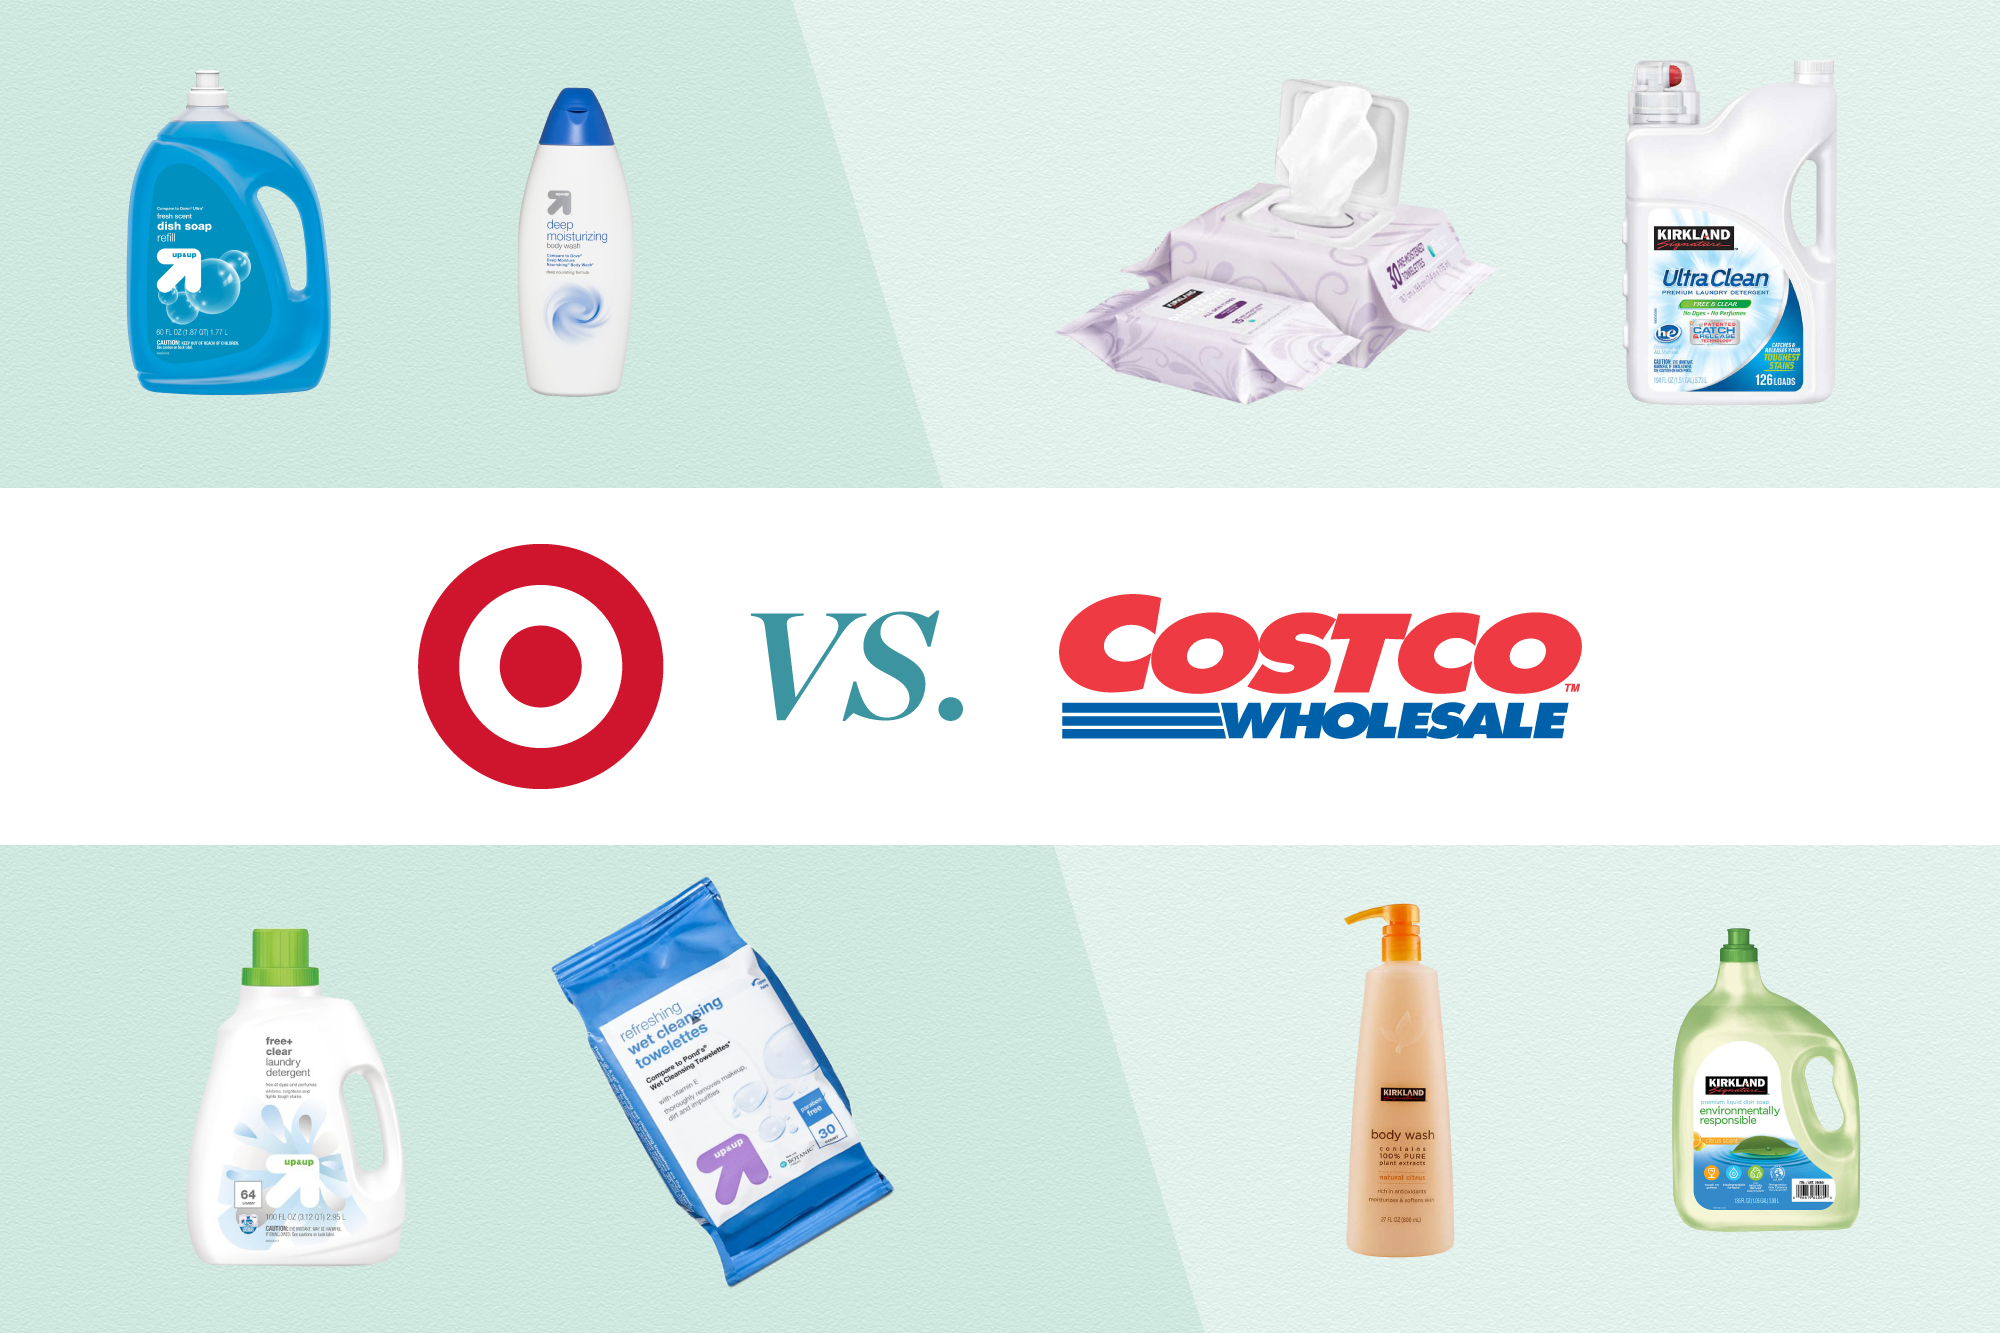 20 Items That Are Always Cheaper at Costco